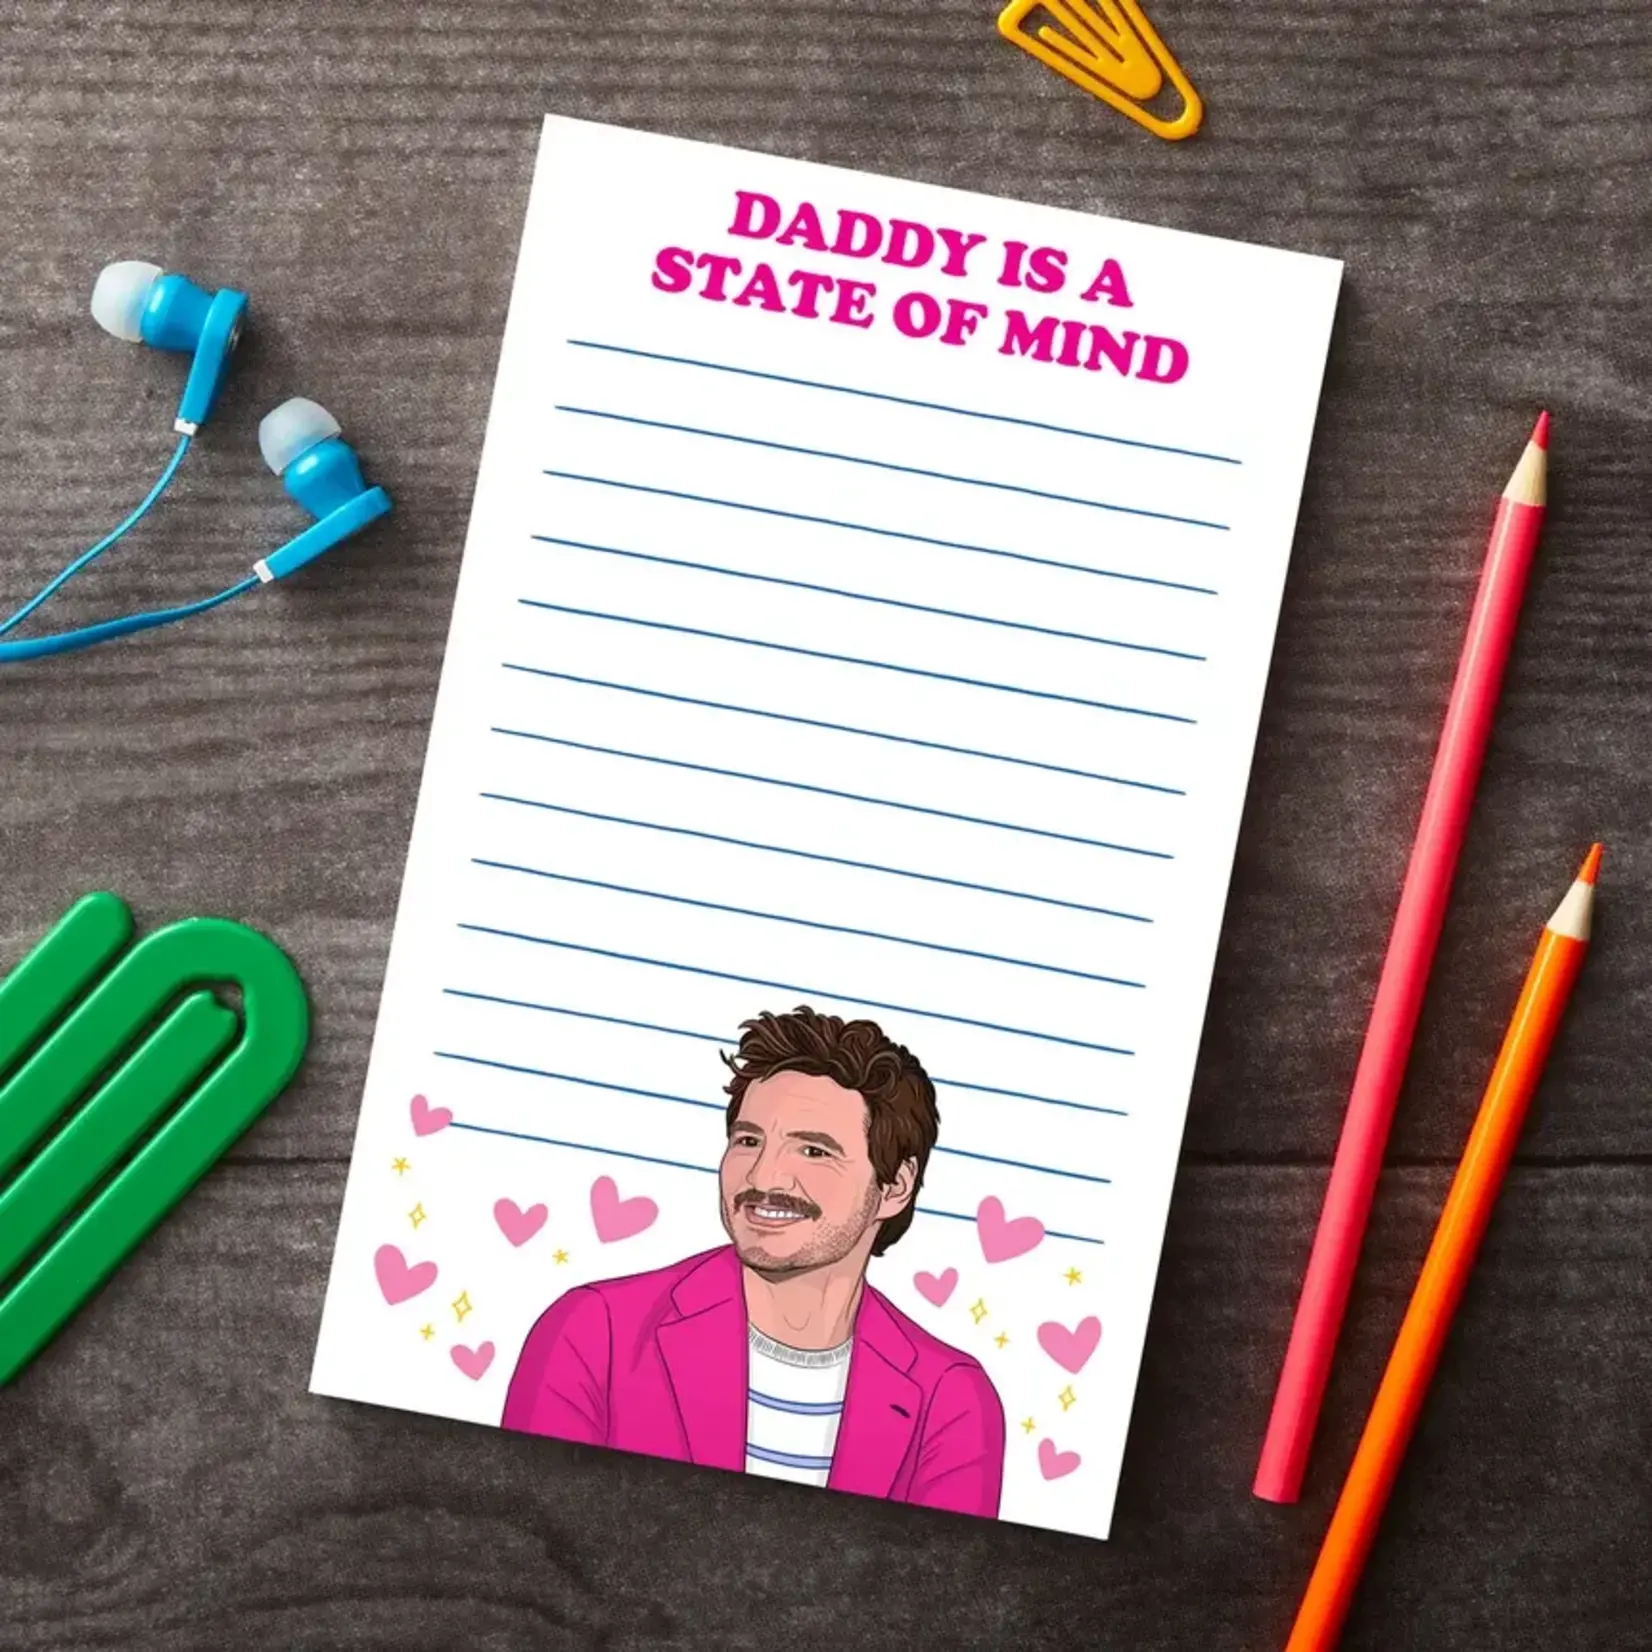 The Found Notepad: Pedro Daddy is a State of Mind